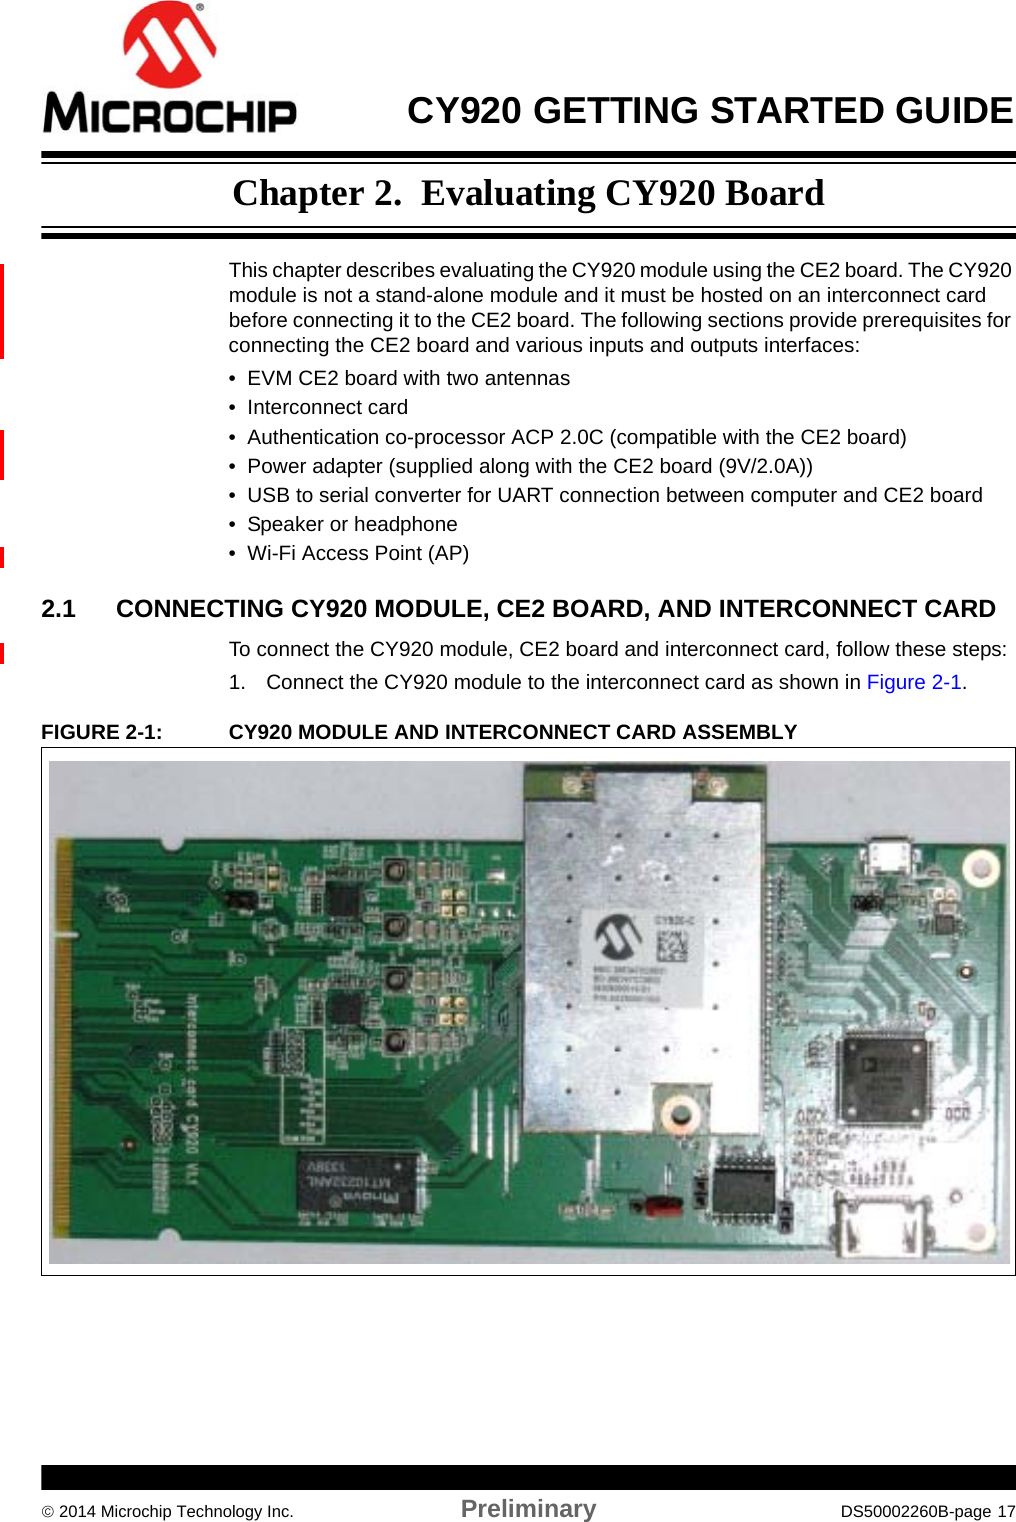  CY920 GETTING STARTED GUIDE 2014 Microchip Technology Inc. Preliminary DS50002260B-page 17Chapter 2.  Evaluating CY920 BoardThis chapter describes evaluating the CY920 module using the CE2 board. The CY920 module is not a stand-alone module and it must be hosted on an interconnect card before connecting it to the CE2 board. The following sections provide prerequisites for connecting the CE2 board and various inputs and outputs interfaces:• EVM CE2 board with two antennas• Interconnect card• Authentication co-processor ACP 2.0C (compatible with the CE2 board)• Power adapter (supplied along with the CE2 board (9V/2.0A))• USB to serial converter for UART connection between computer and CE2 board• Speaker or headphone• Wi-Fi Access Point (AP)2.1 CONNECTING CY920 MODULE, CE2 BOARD, AND INTERCONNECT CARDTo connect the CY920 module, CE2 board and interconnect card, follow these steps:1. Connect the CY920 module to the interconnect card as shown in Figure 2-1.FIGURE 2-1: CY920 MODULE AND INTERCONNECT CARD ASSEMBLY